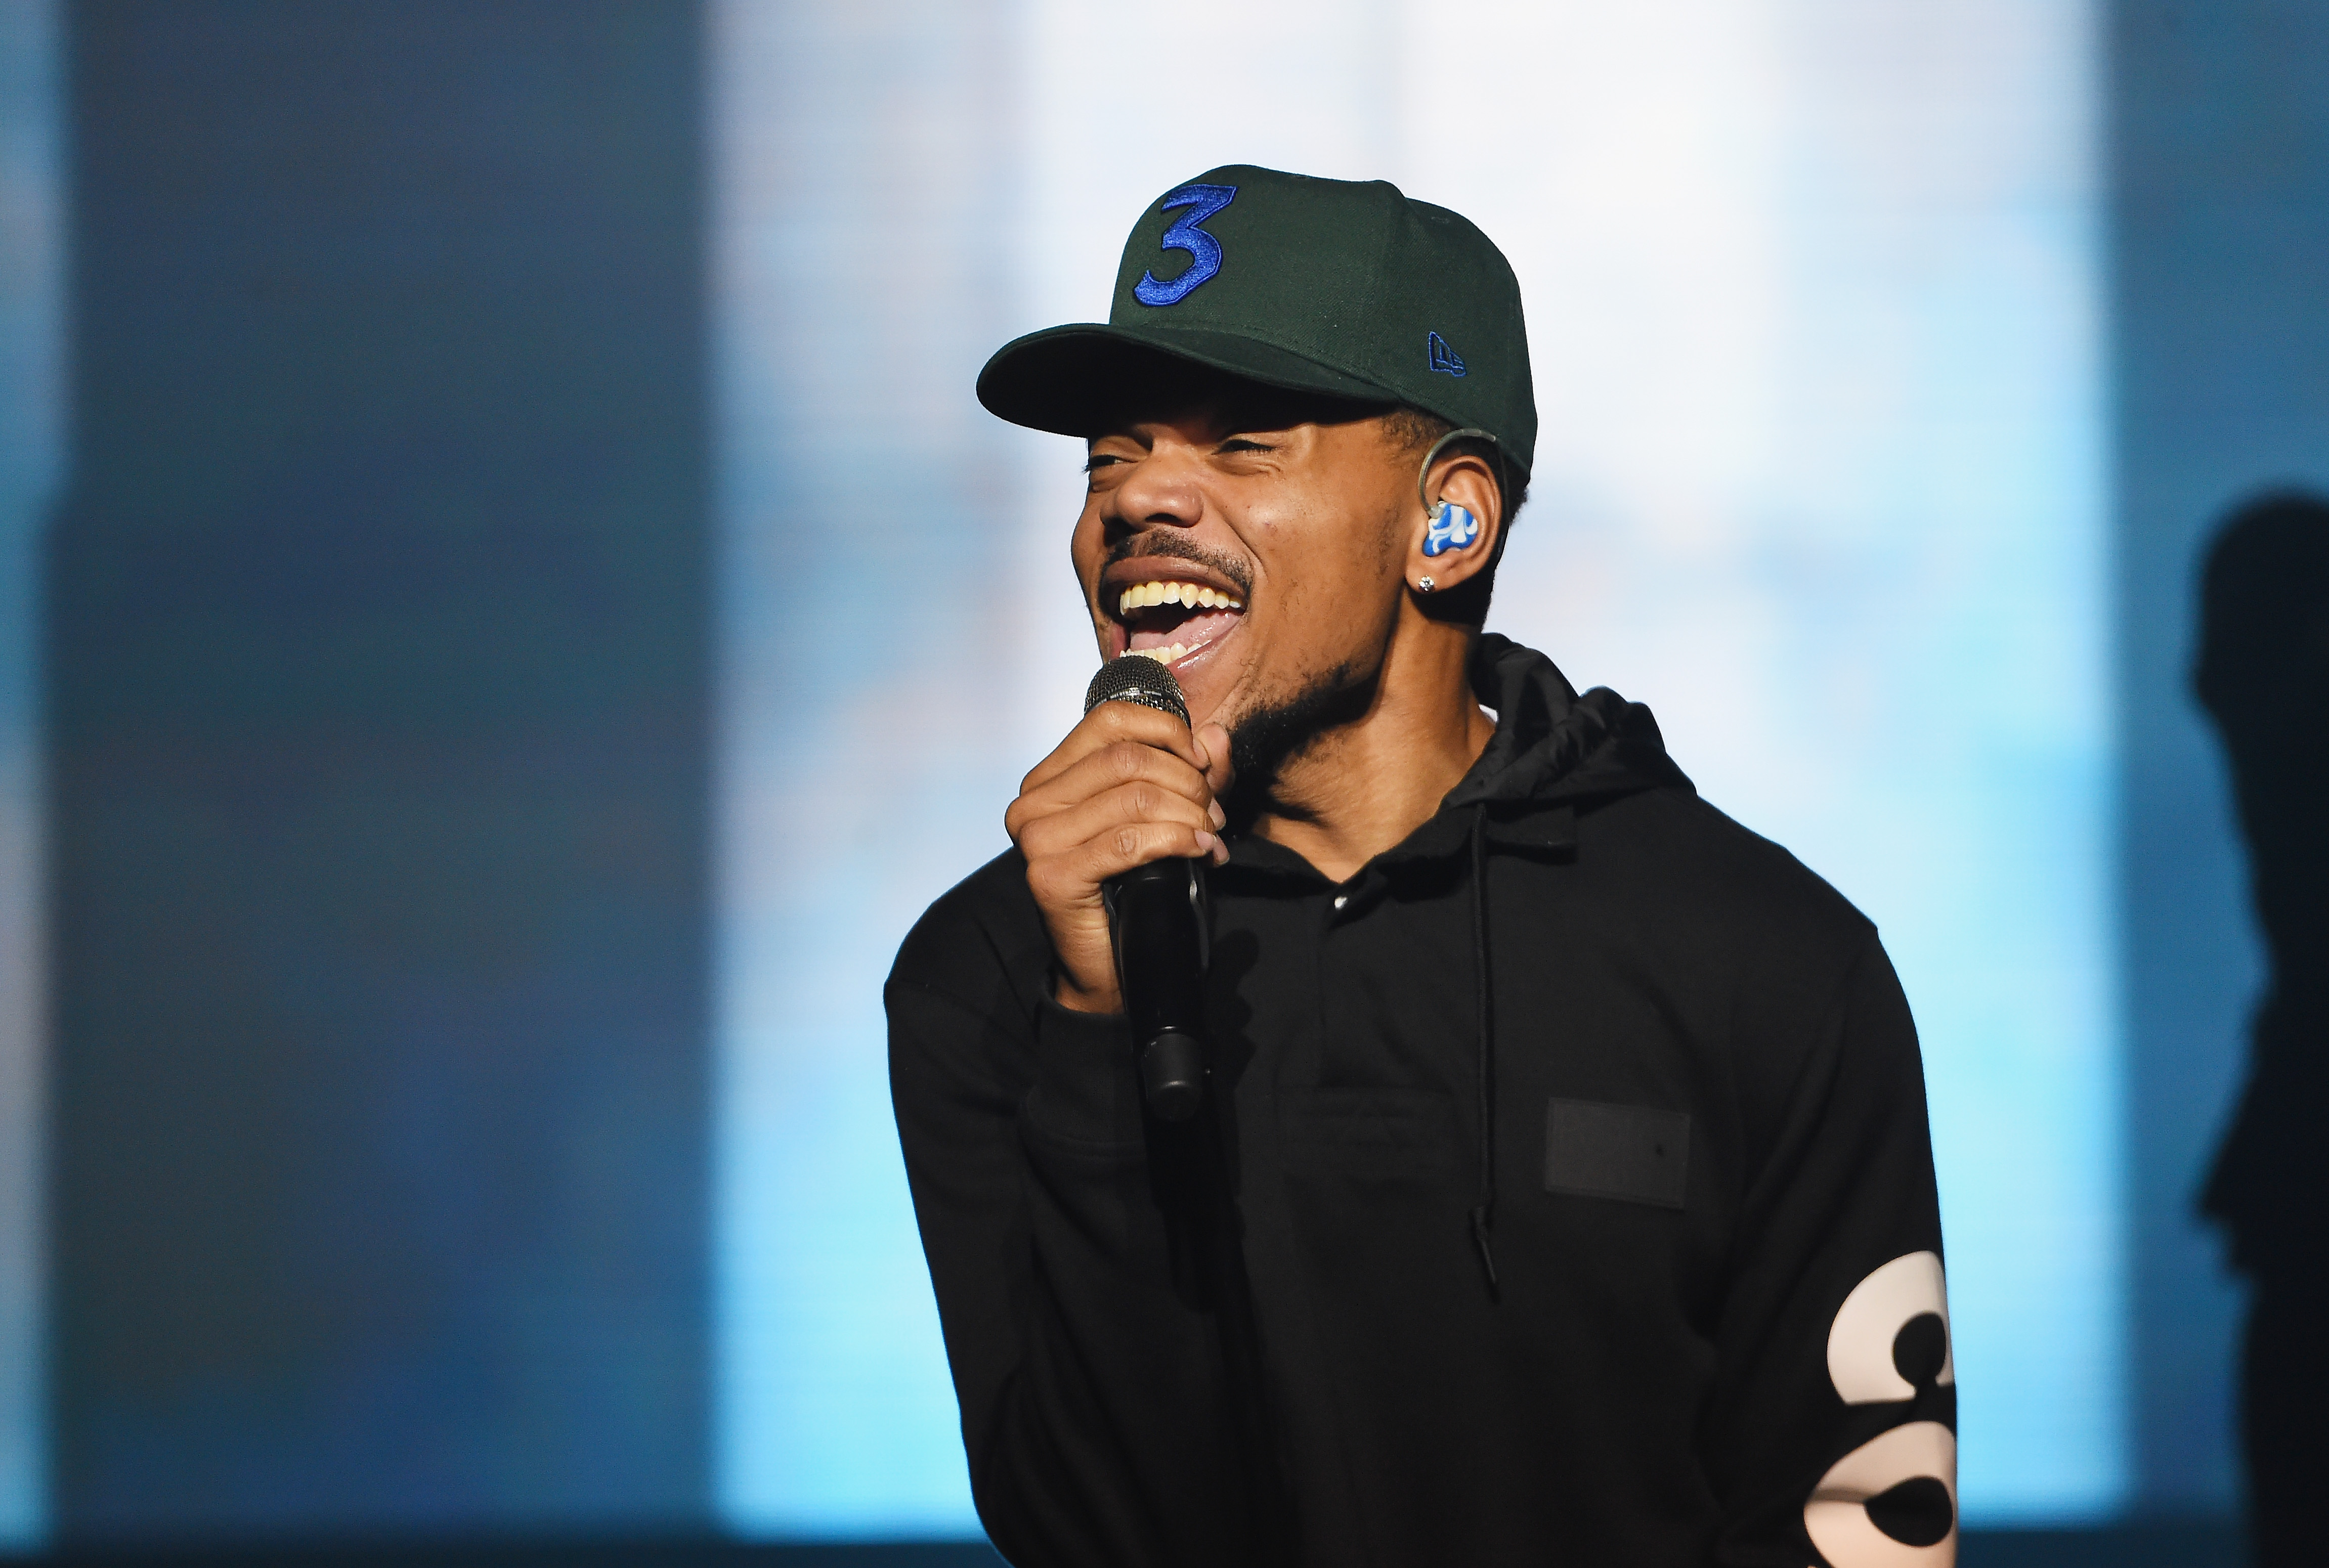 Chance The Rapper To Headline Spotify’s RapCaviar Live In Brooklyn In Partnership With Live Nation Urban And Verizon